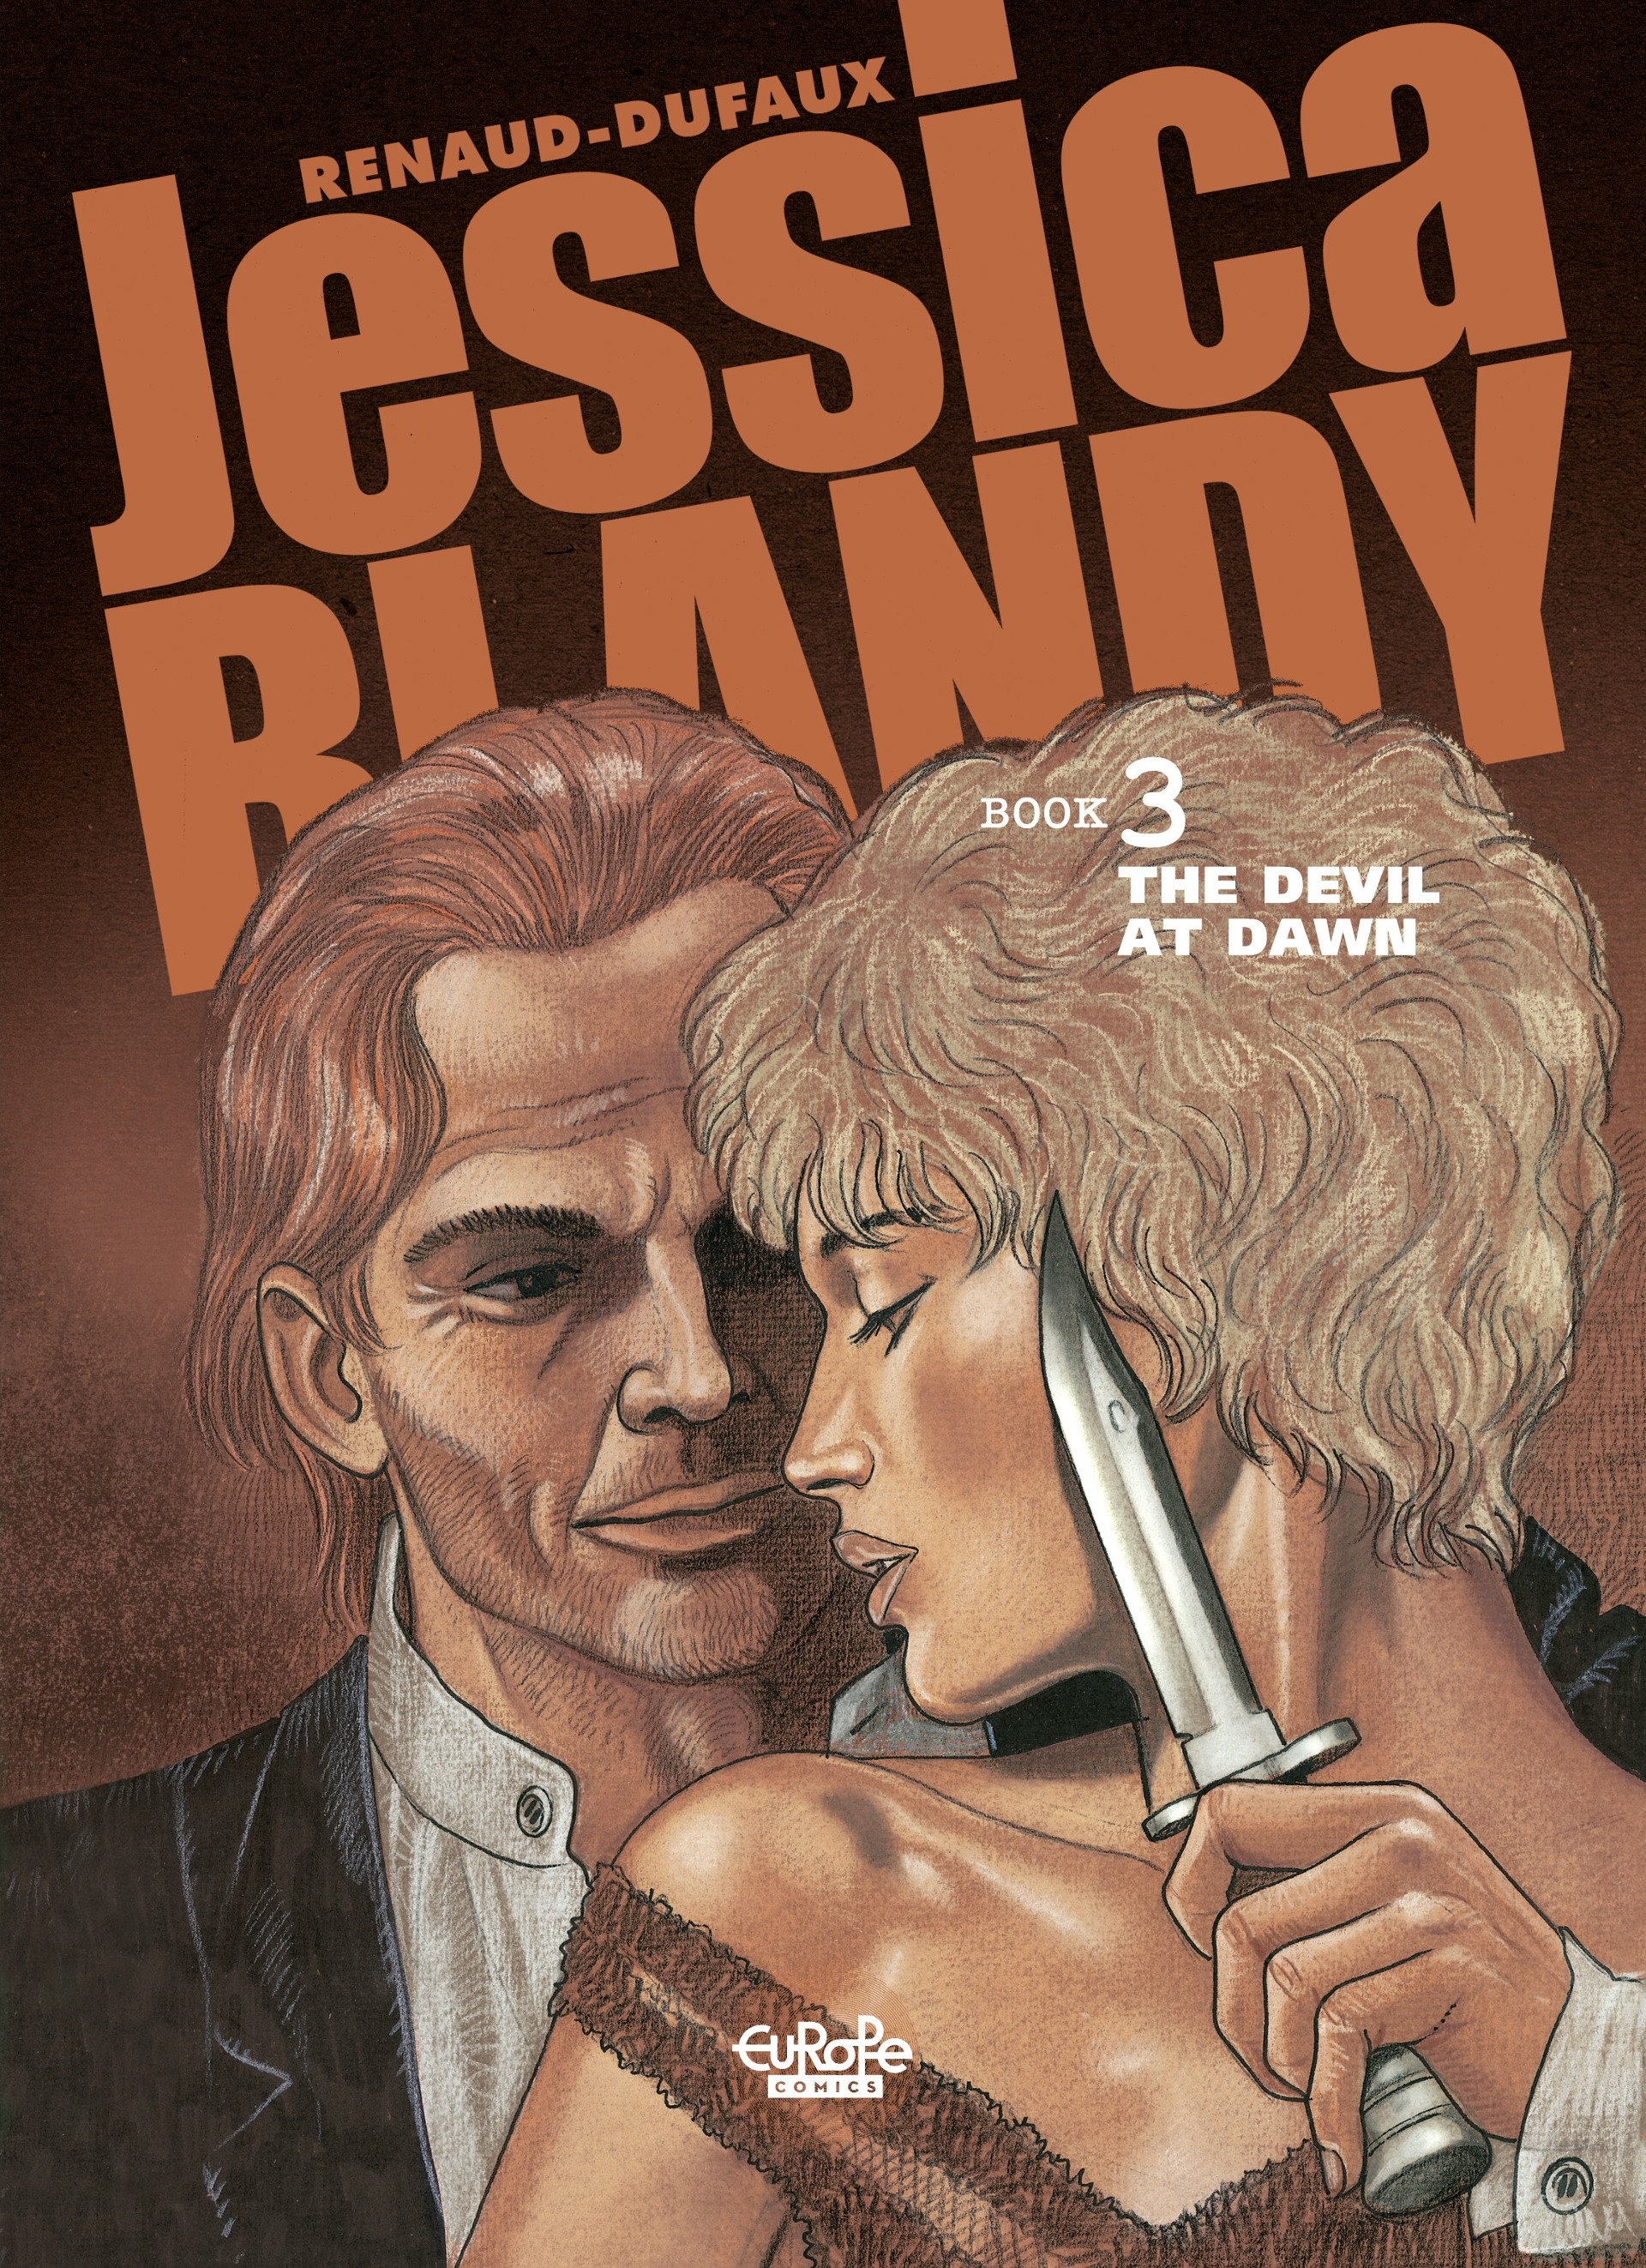 Read online Jessica Blandy comic -  Issue #3 - 1